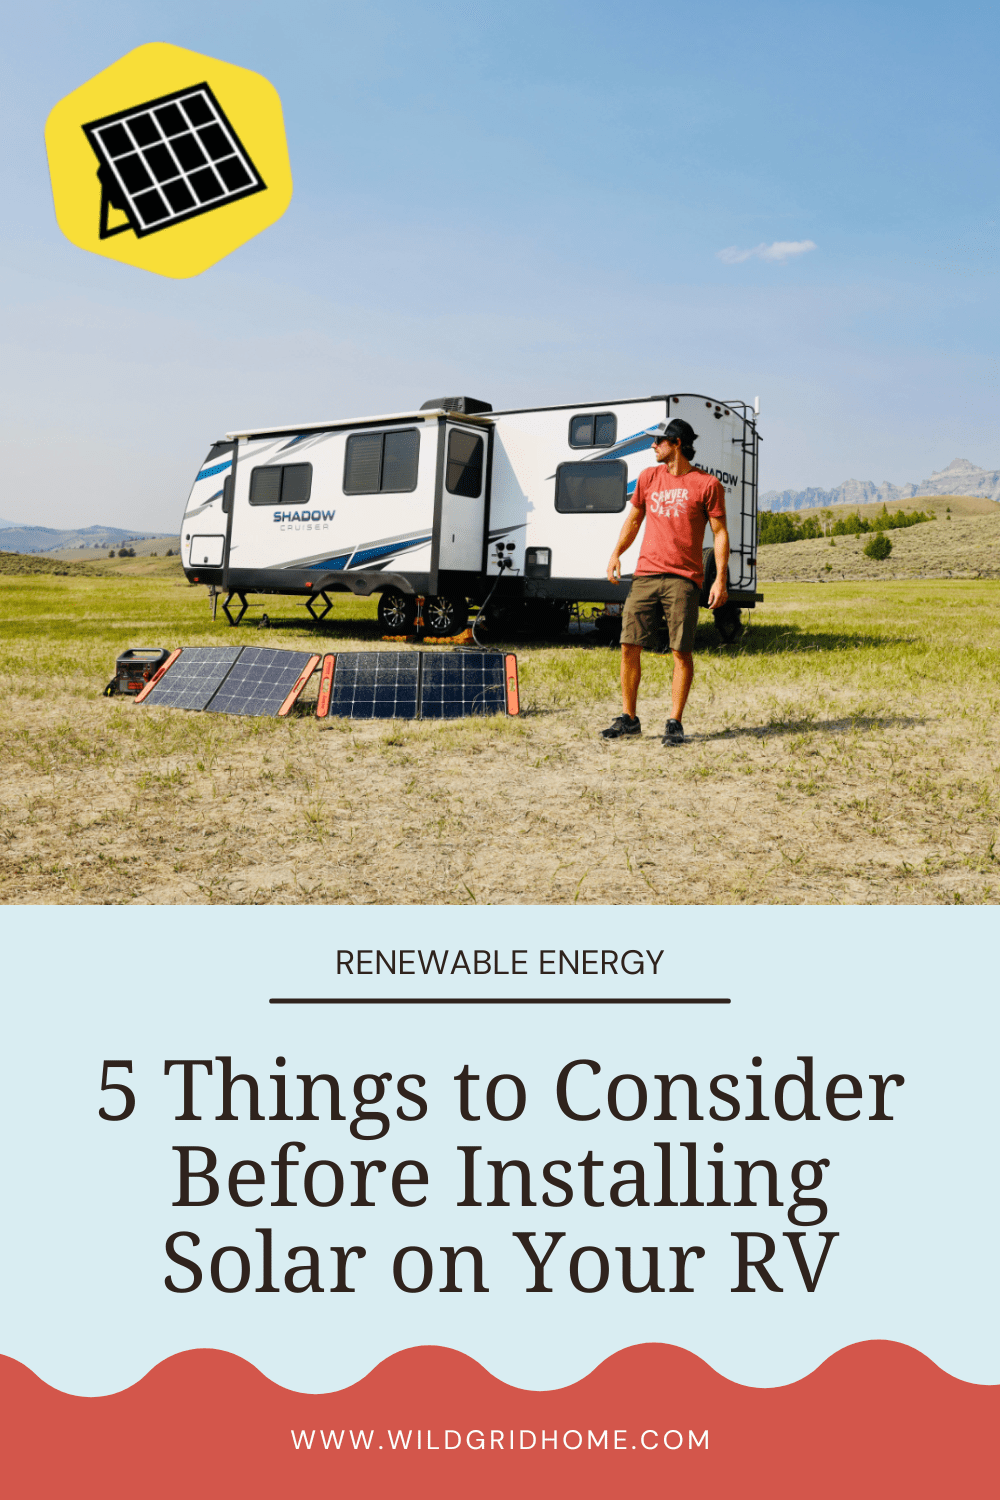 5 Things to Consider Before Installing Solar on Your RV - Wildgrid Home